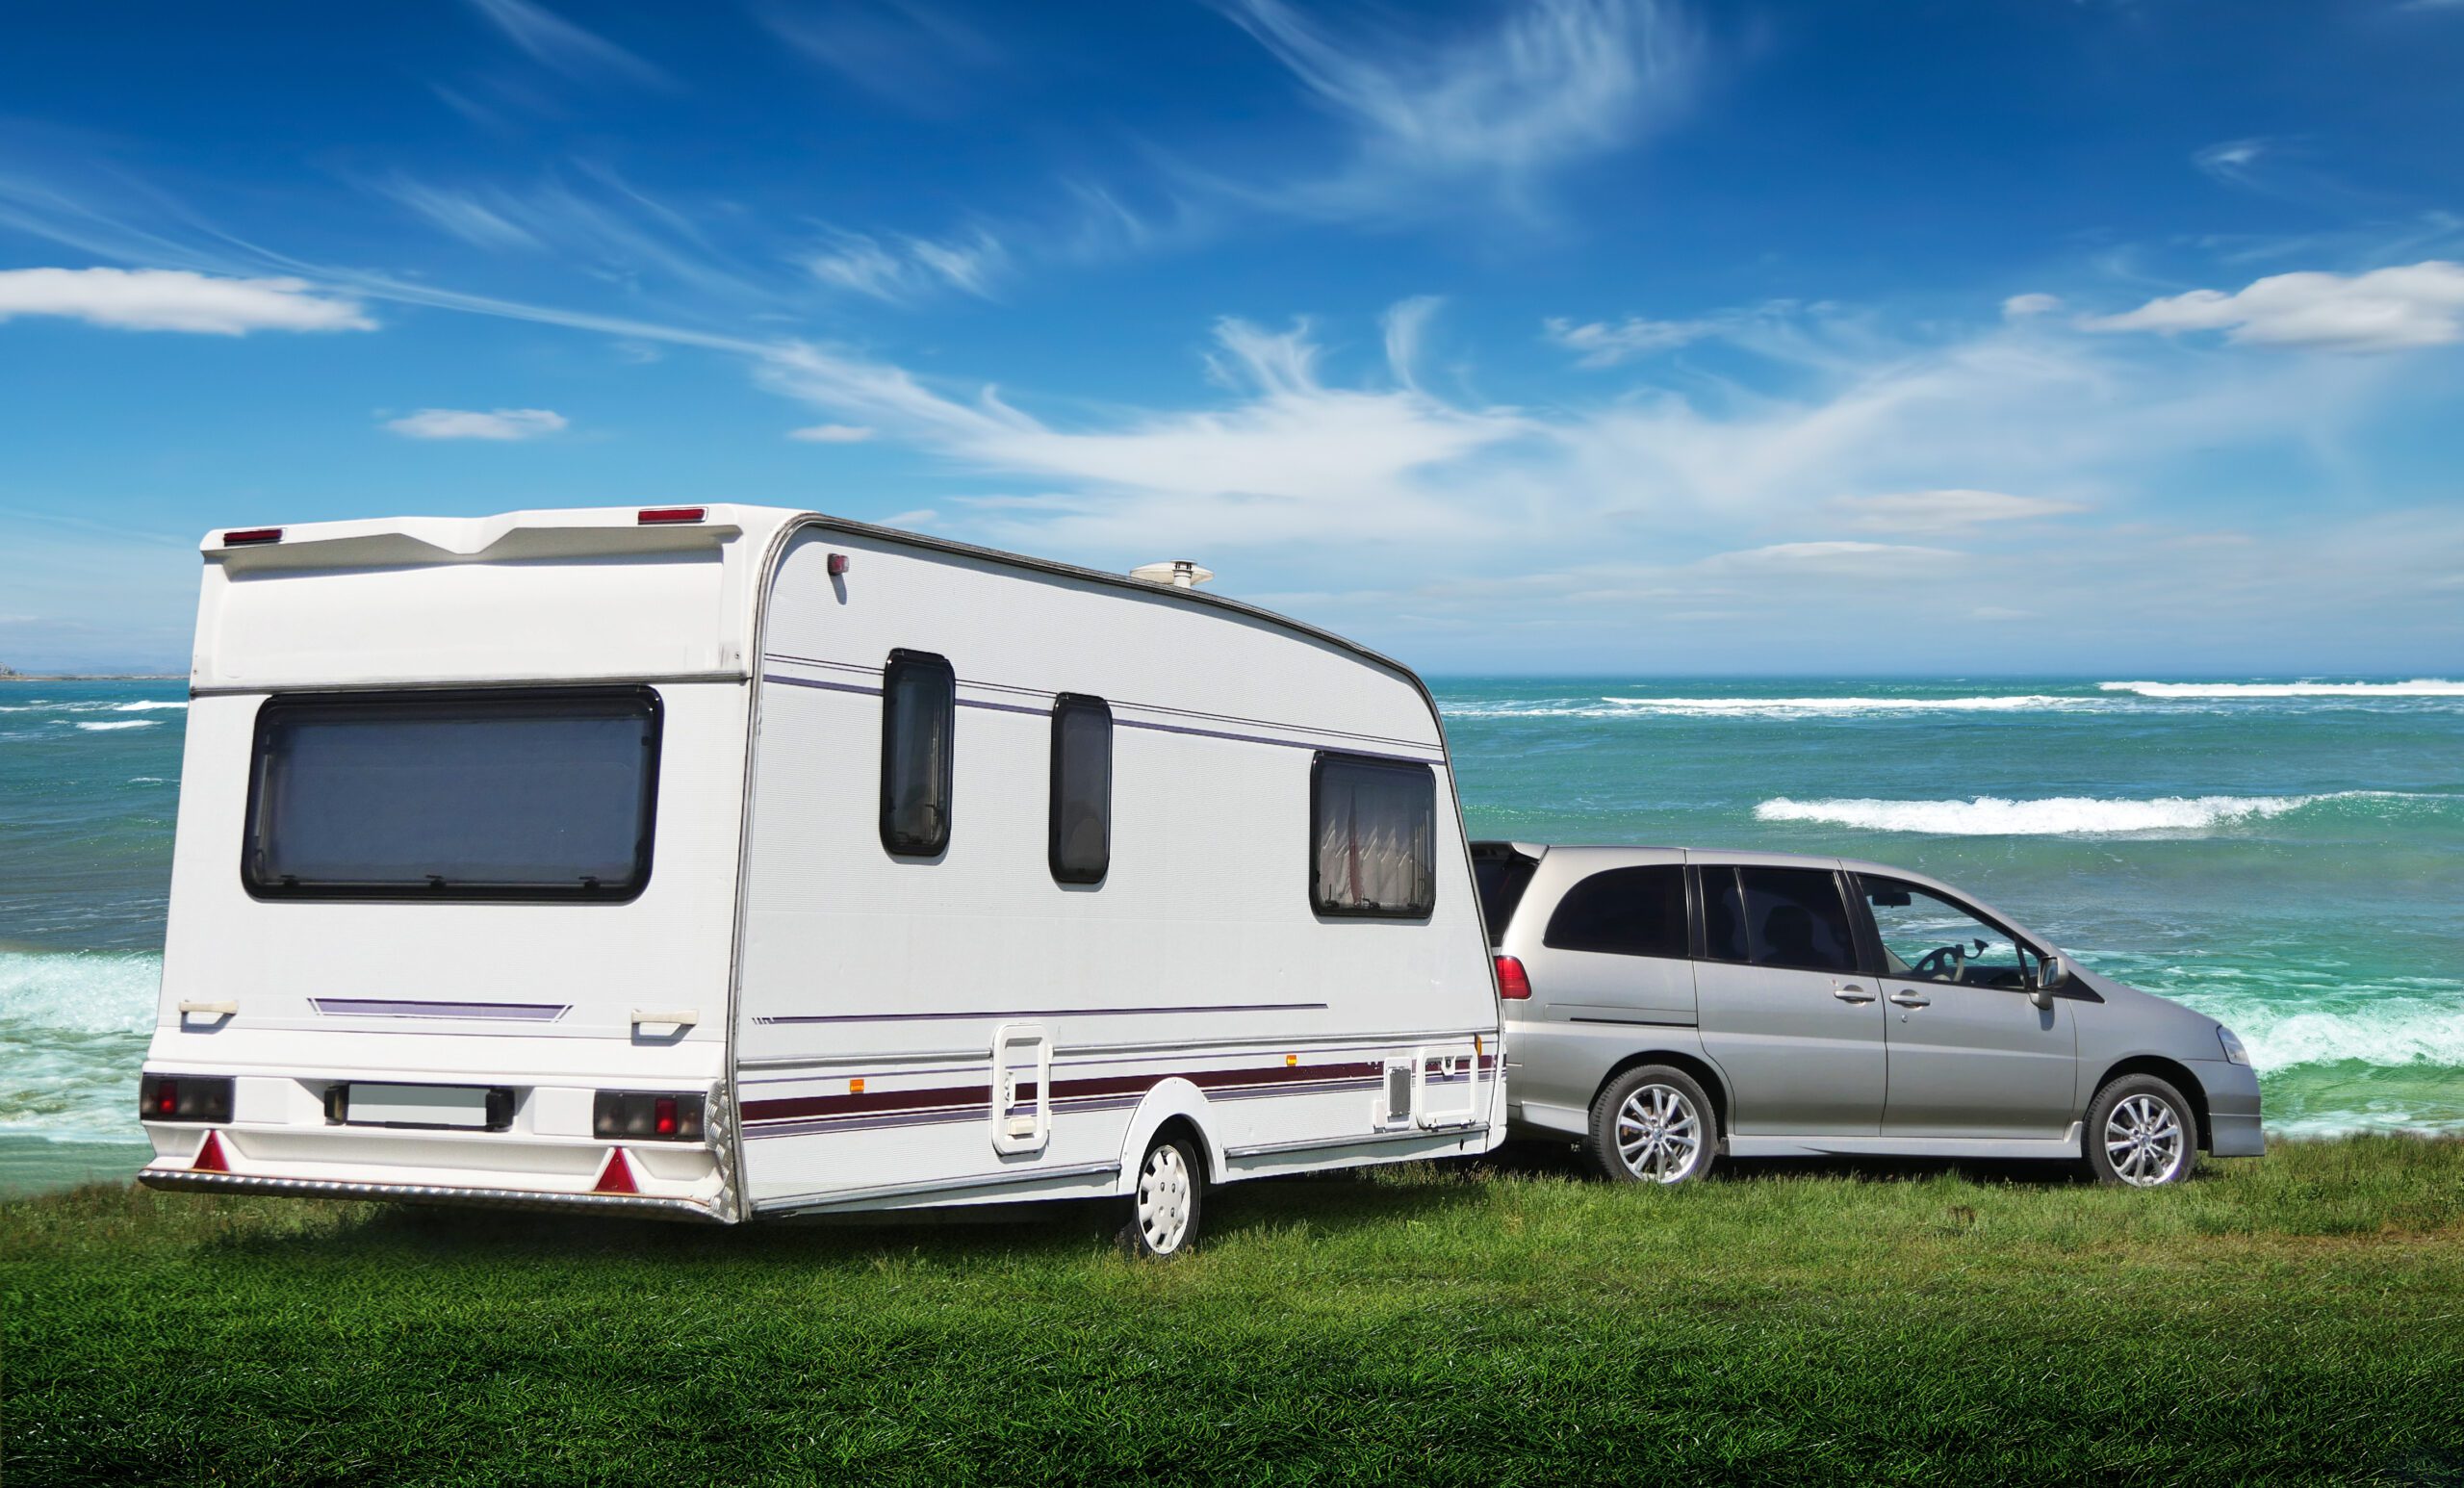 Caravan Insurance: What Does it Cover and Why Do You Need It?